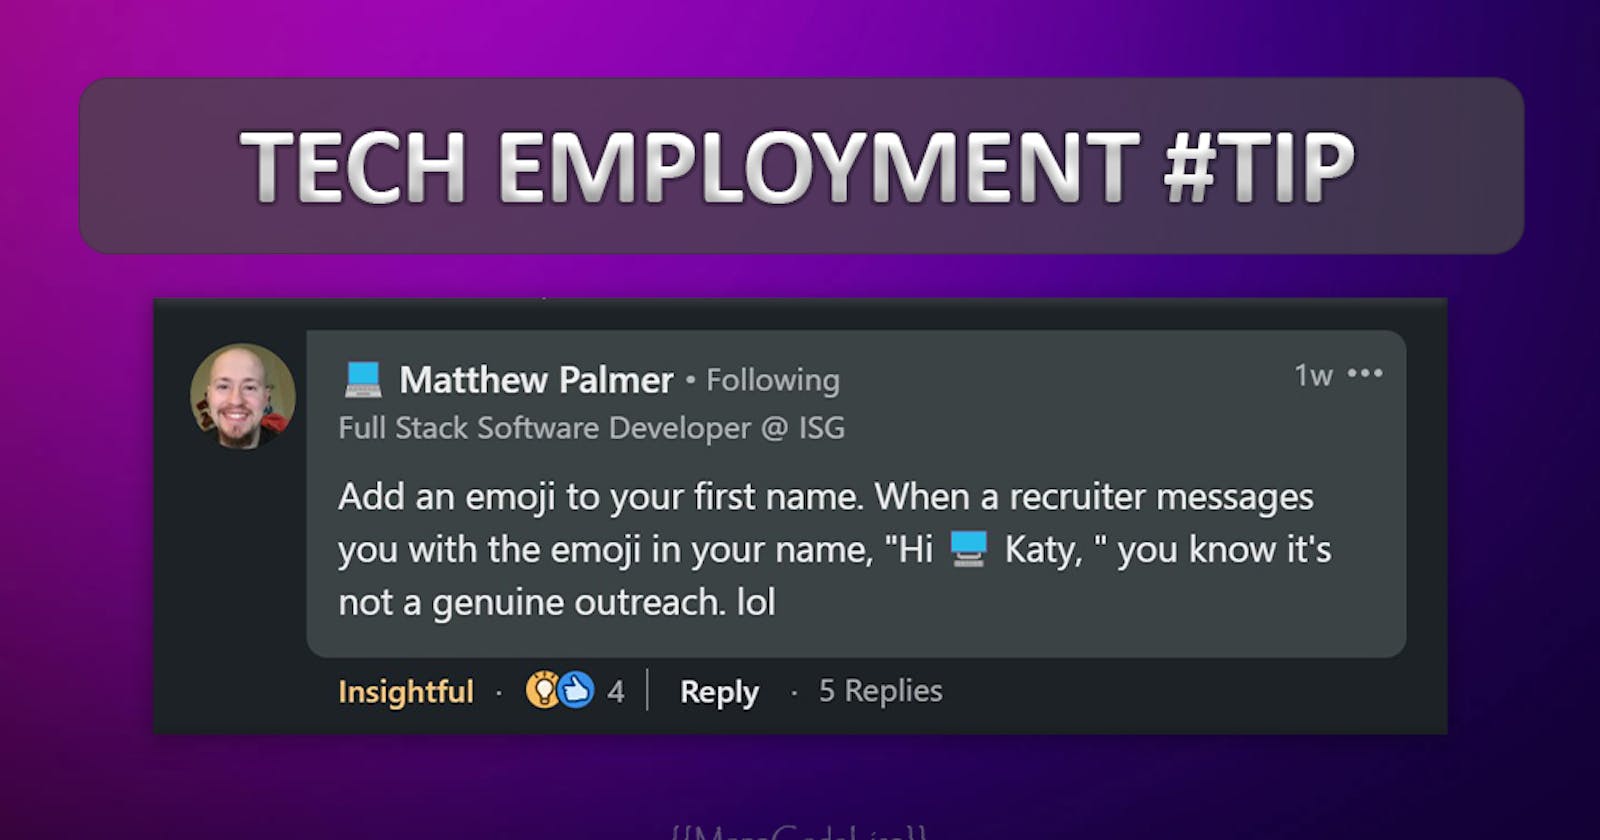 'Add emoji to your first name' - Tech Employment #TIP